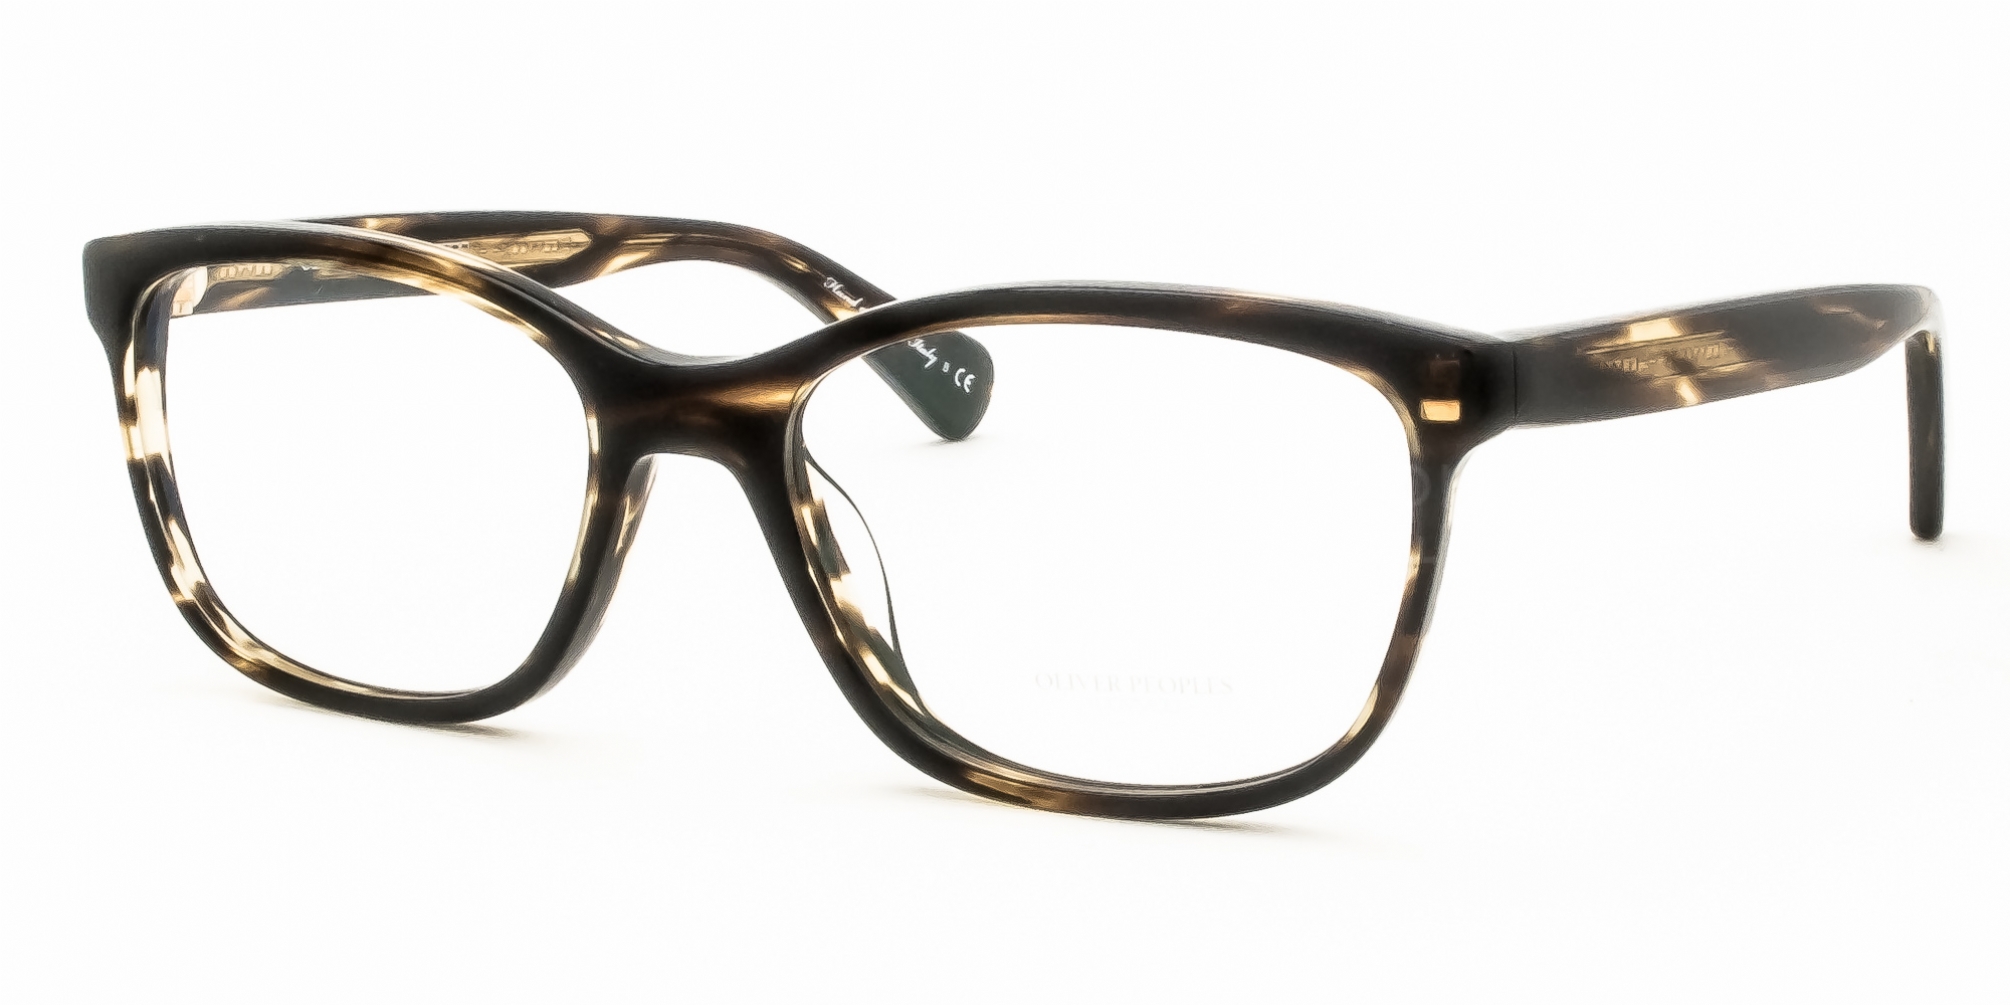 OLIVER PEOPLES FOLLIES 1003